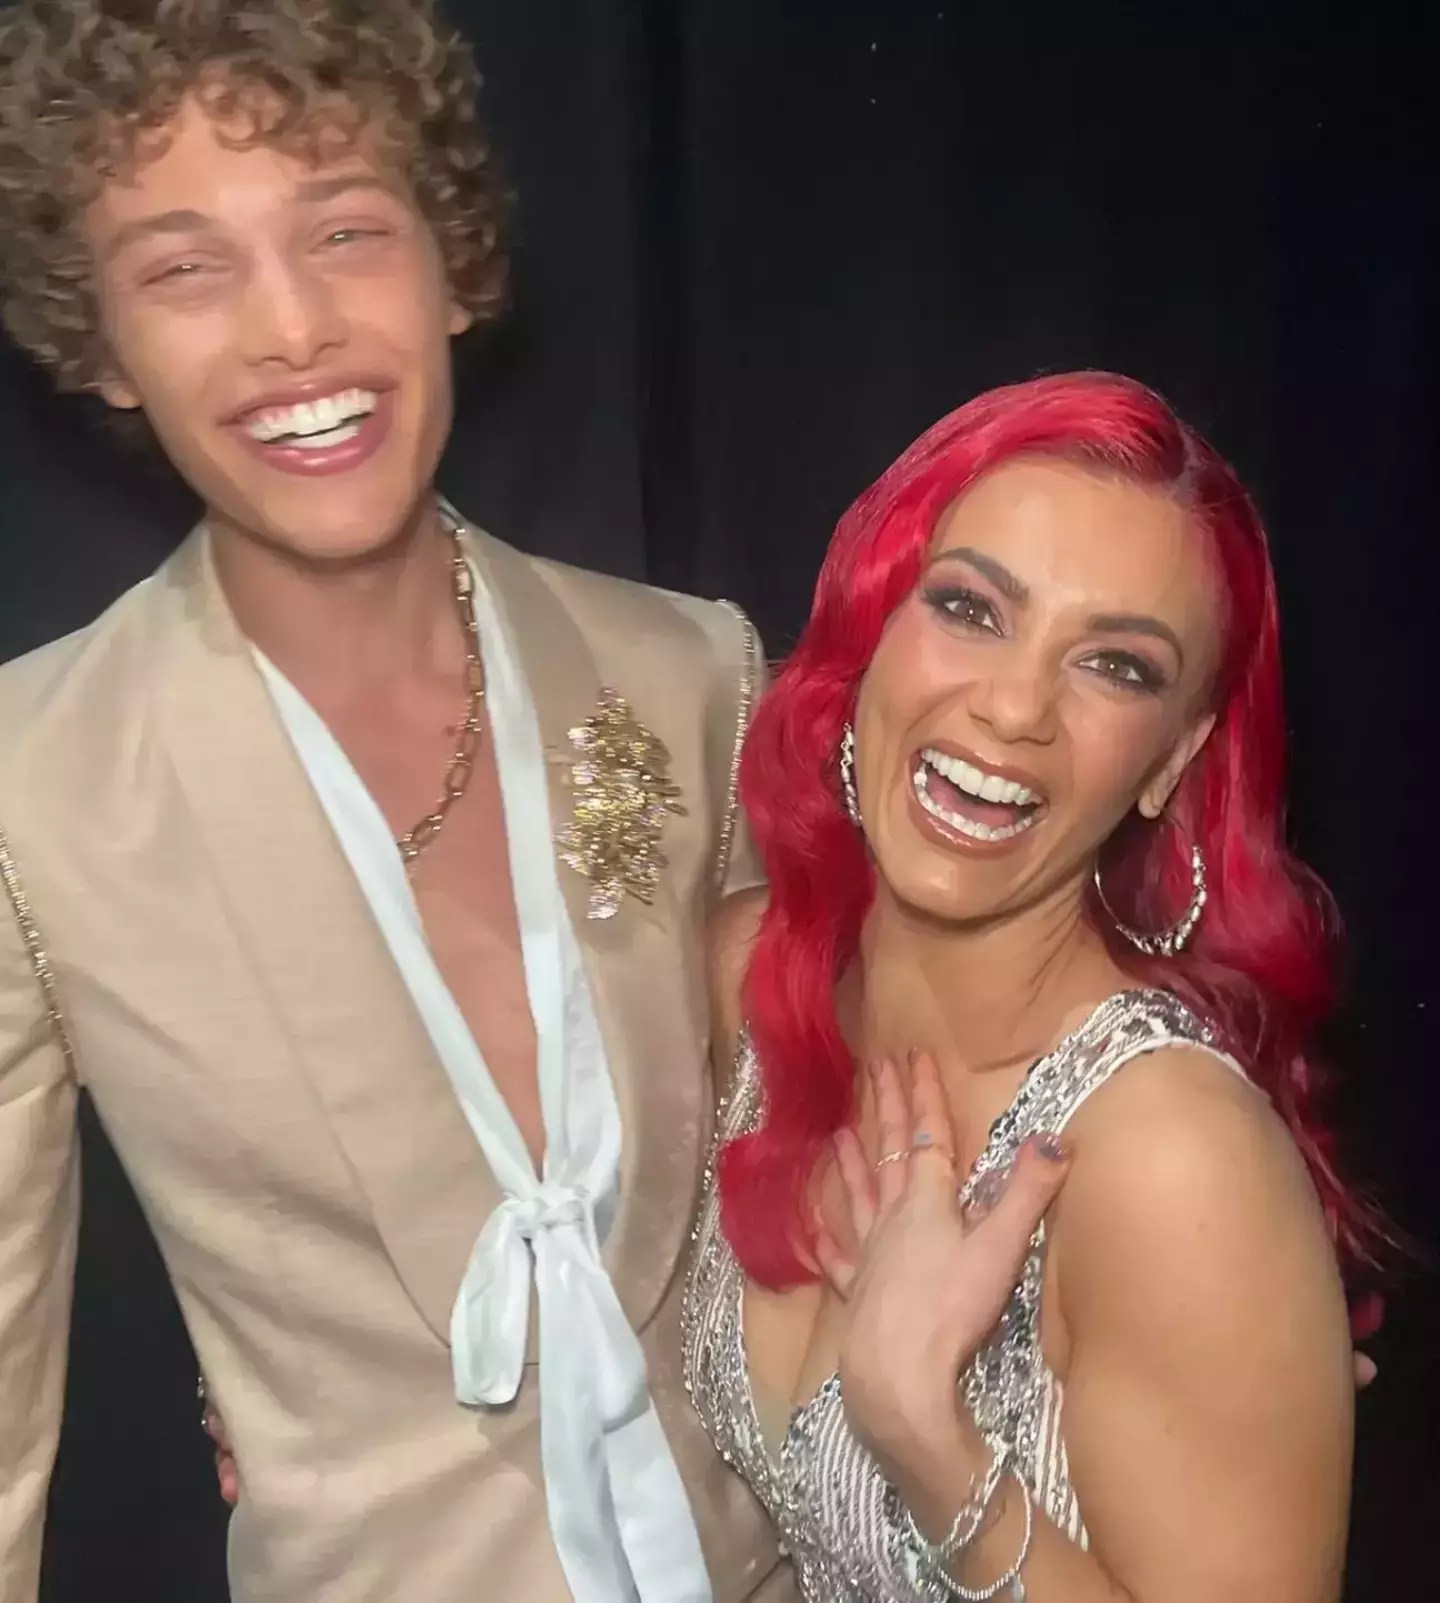 Bobby Brazier and Dianne Buswell wowed the judges after scoring an impressive 30 out of 40 last week.